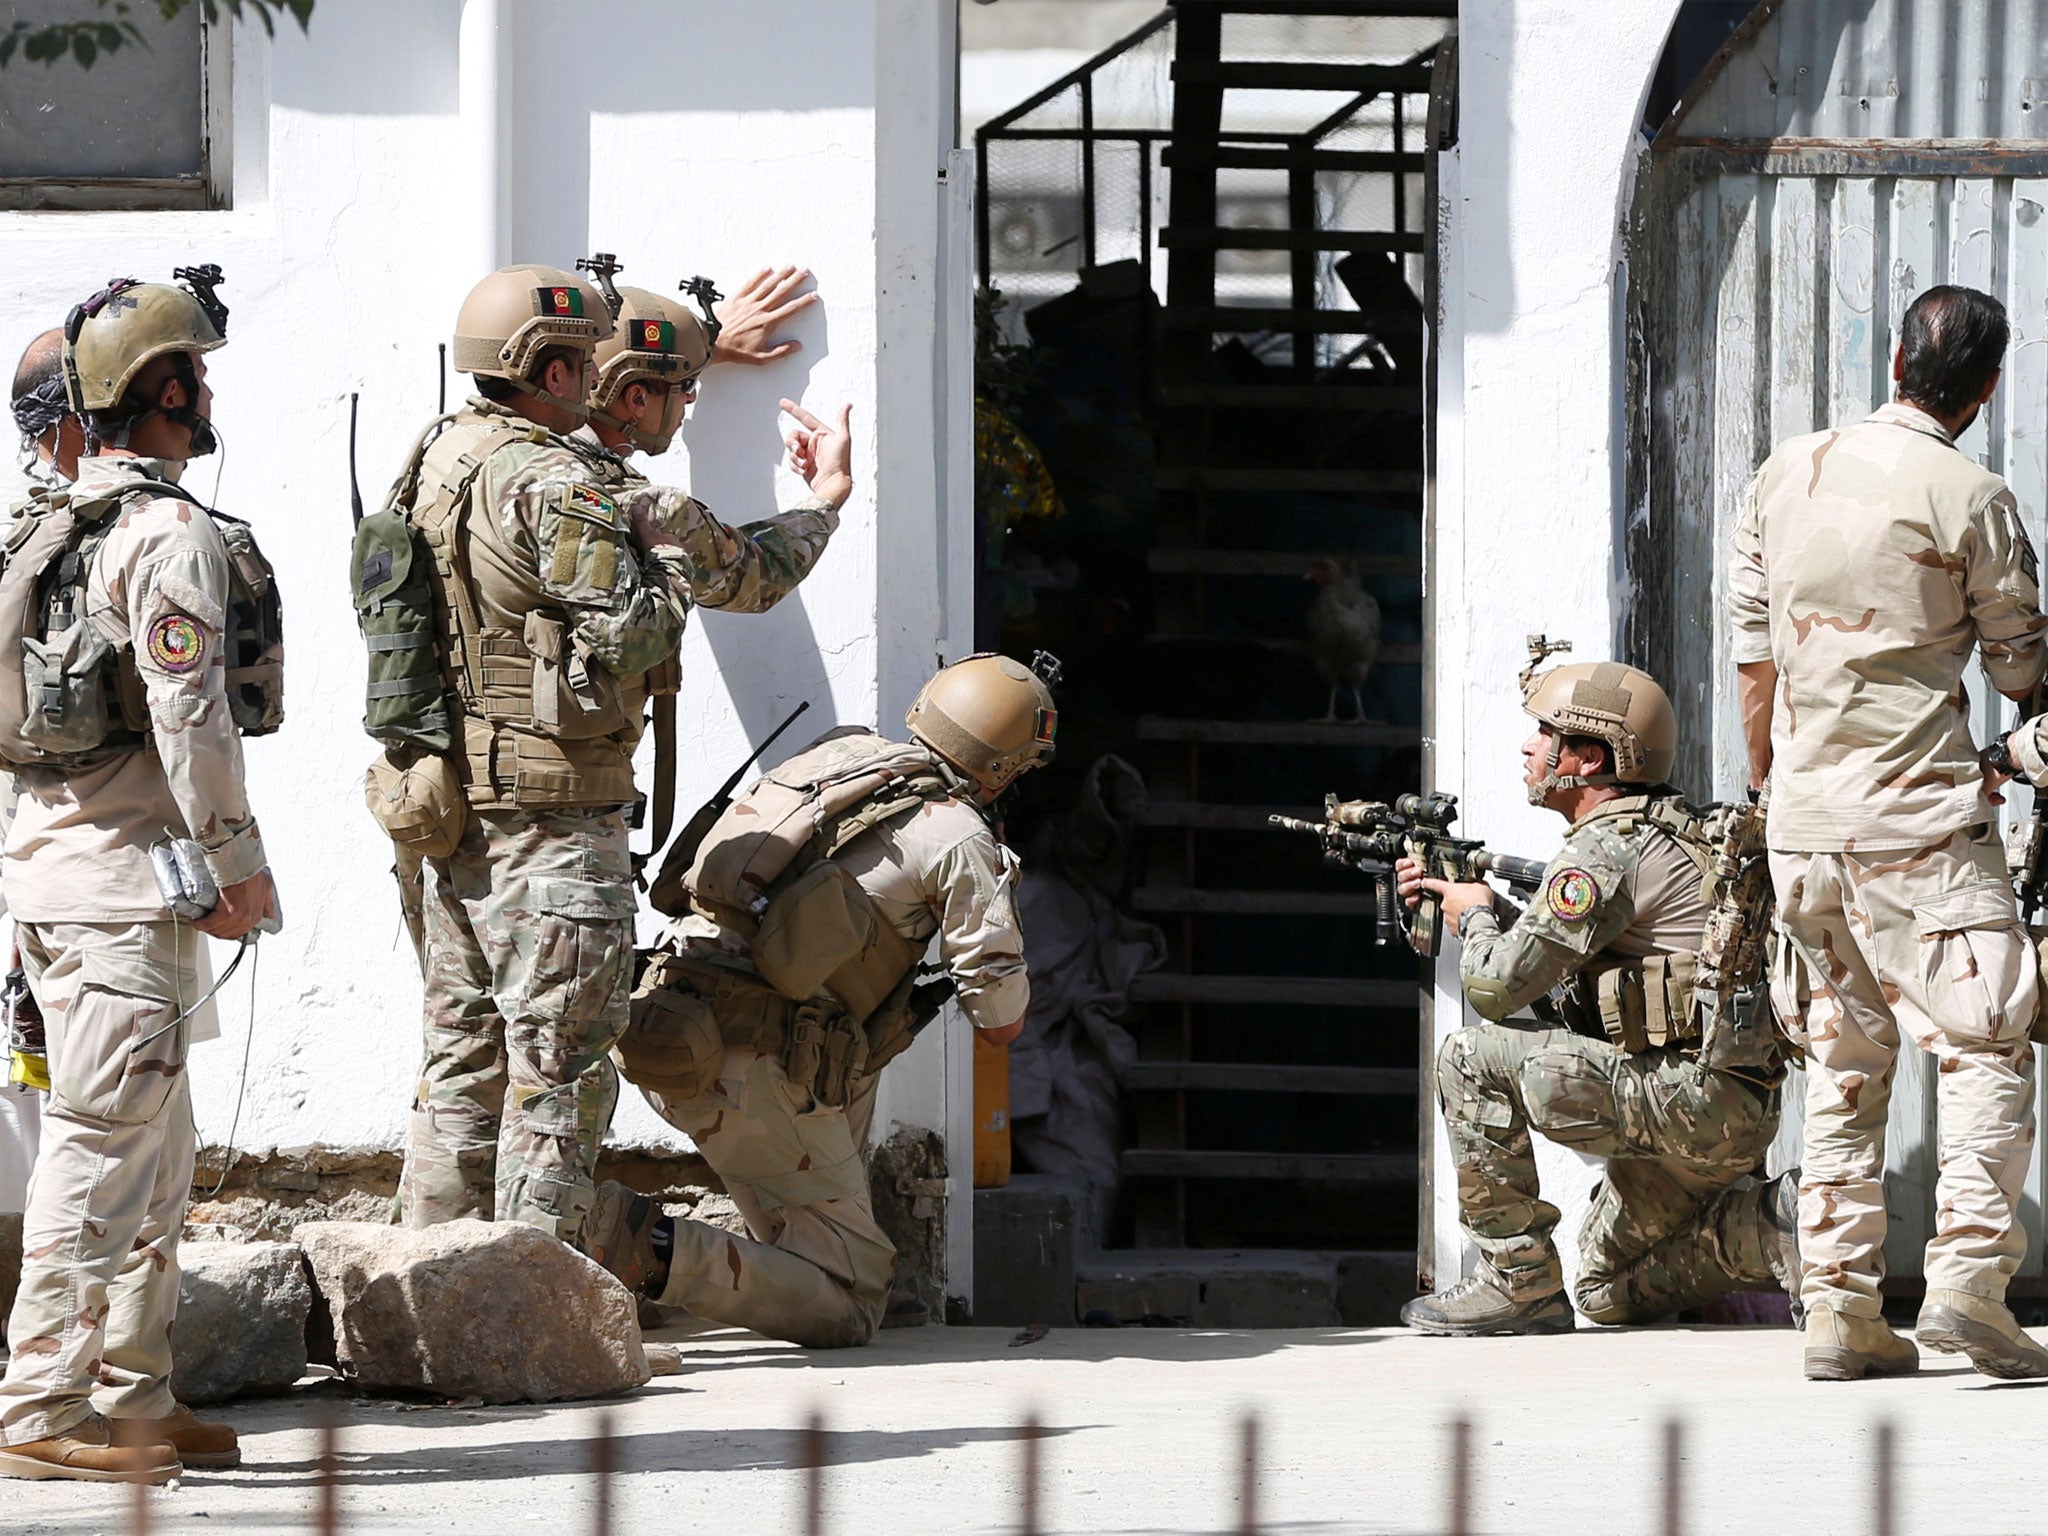 Afghan security forces arrive at the mosque after a recent terror attack in Kabul